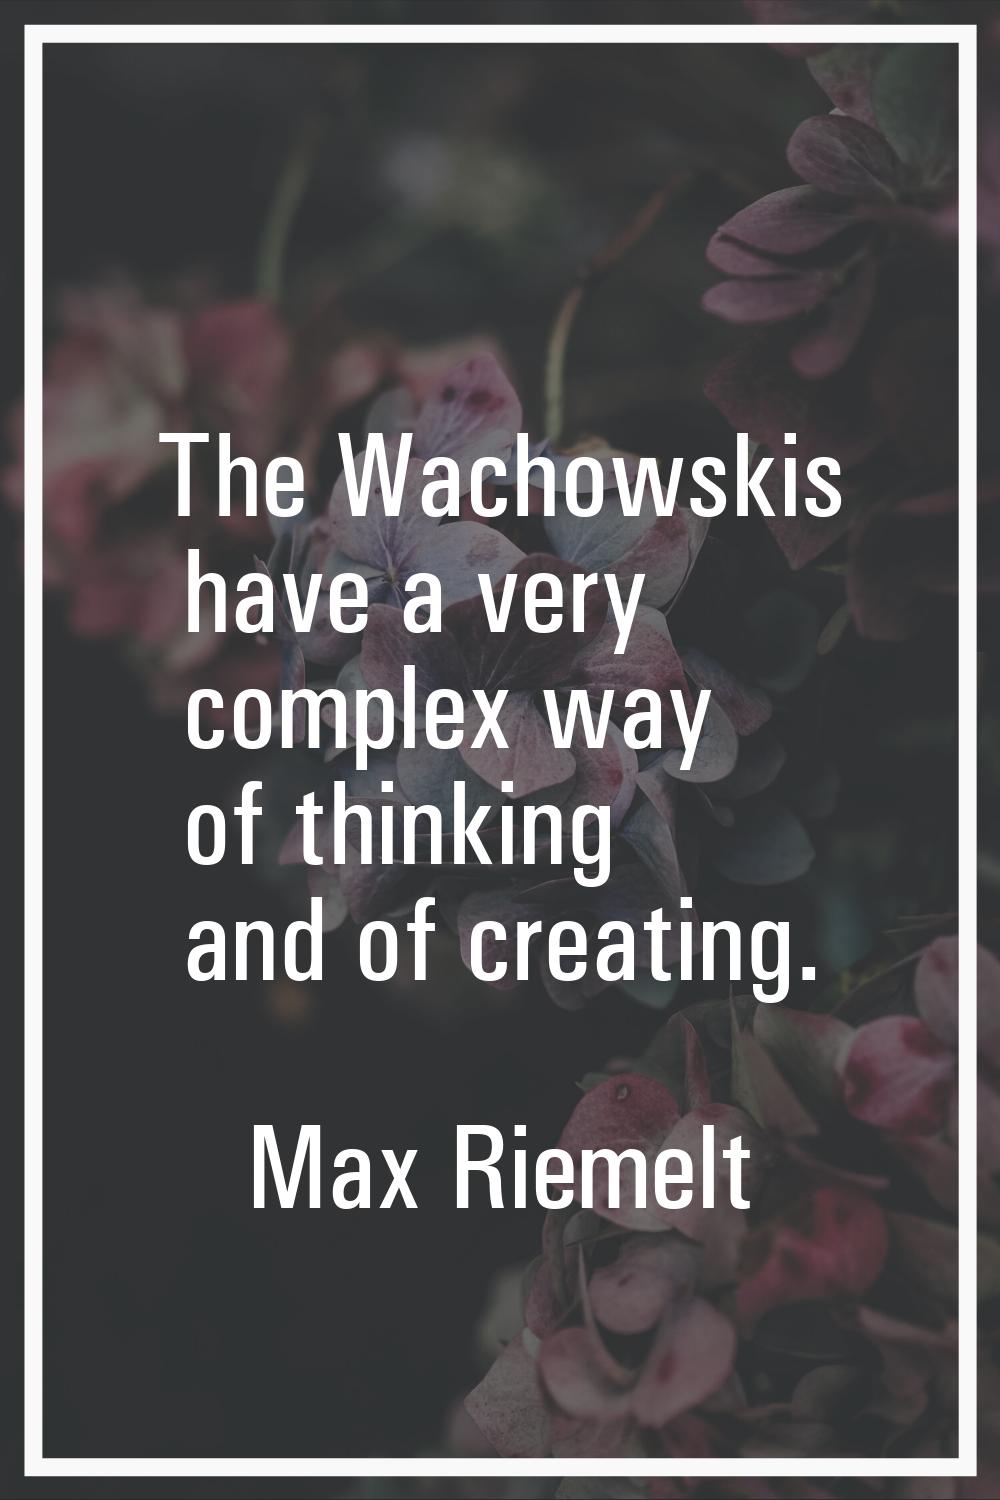 The Wachowskis have a very complex way of thinking and of creating.